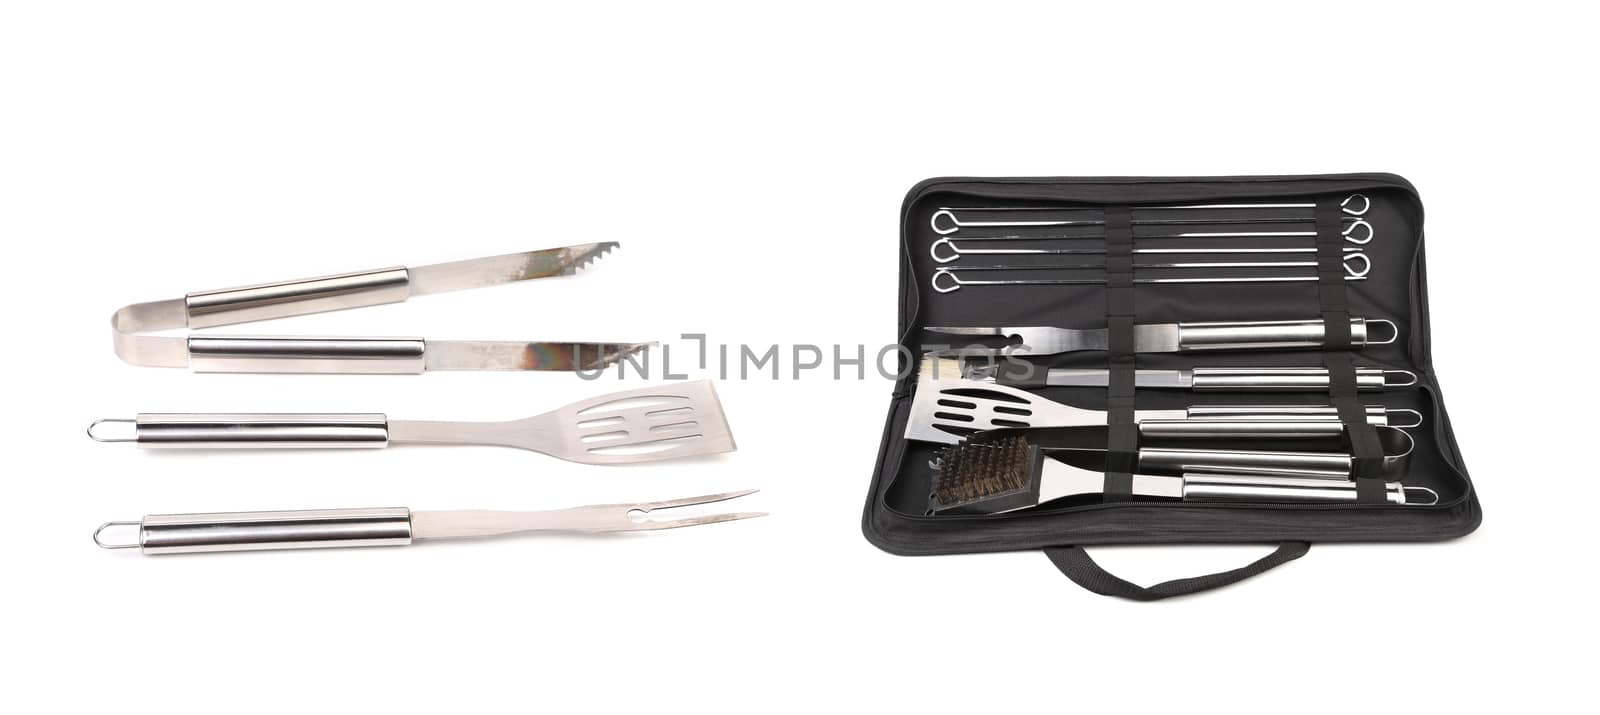 Set of tools for bbq in black bag. Isolated on a white background.